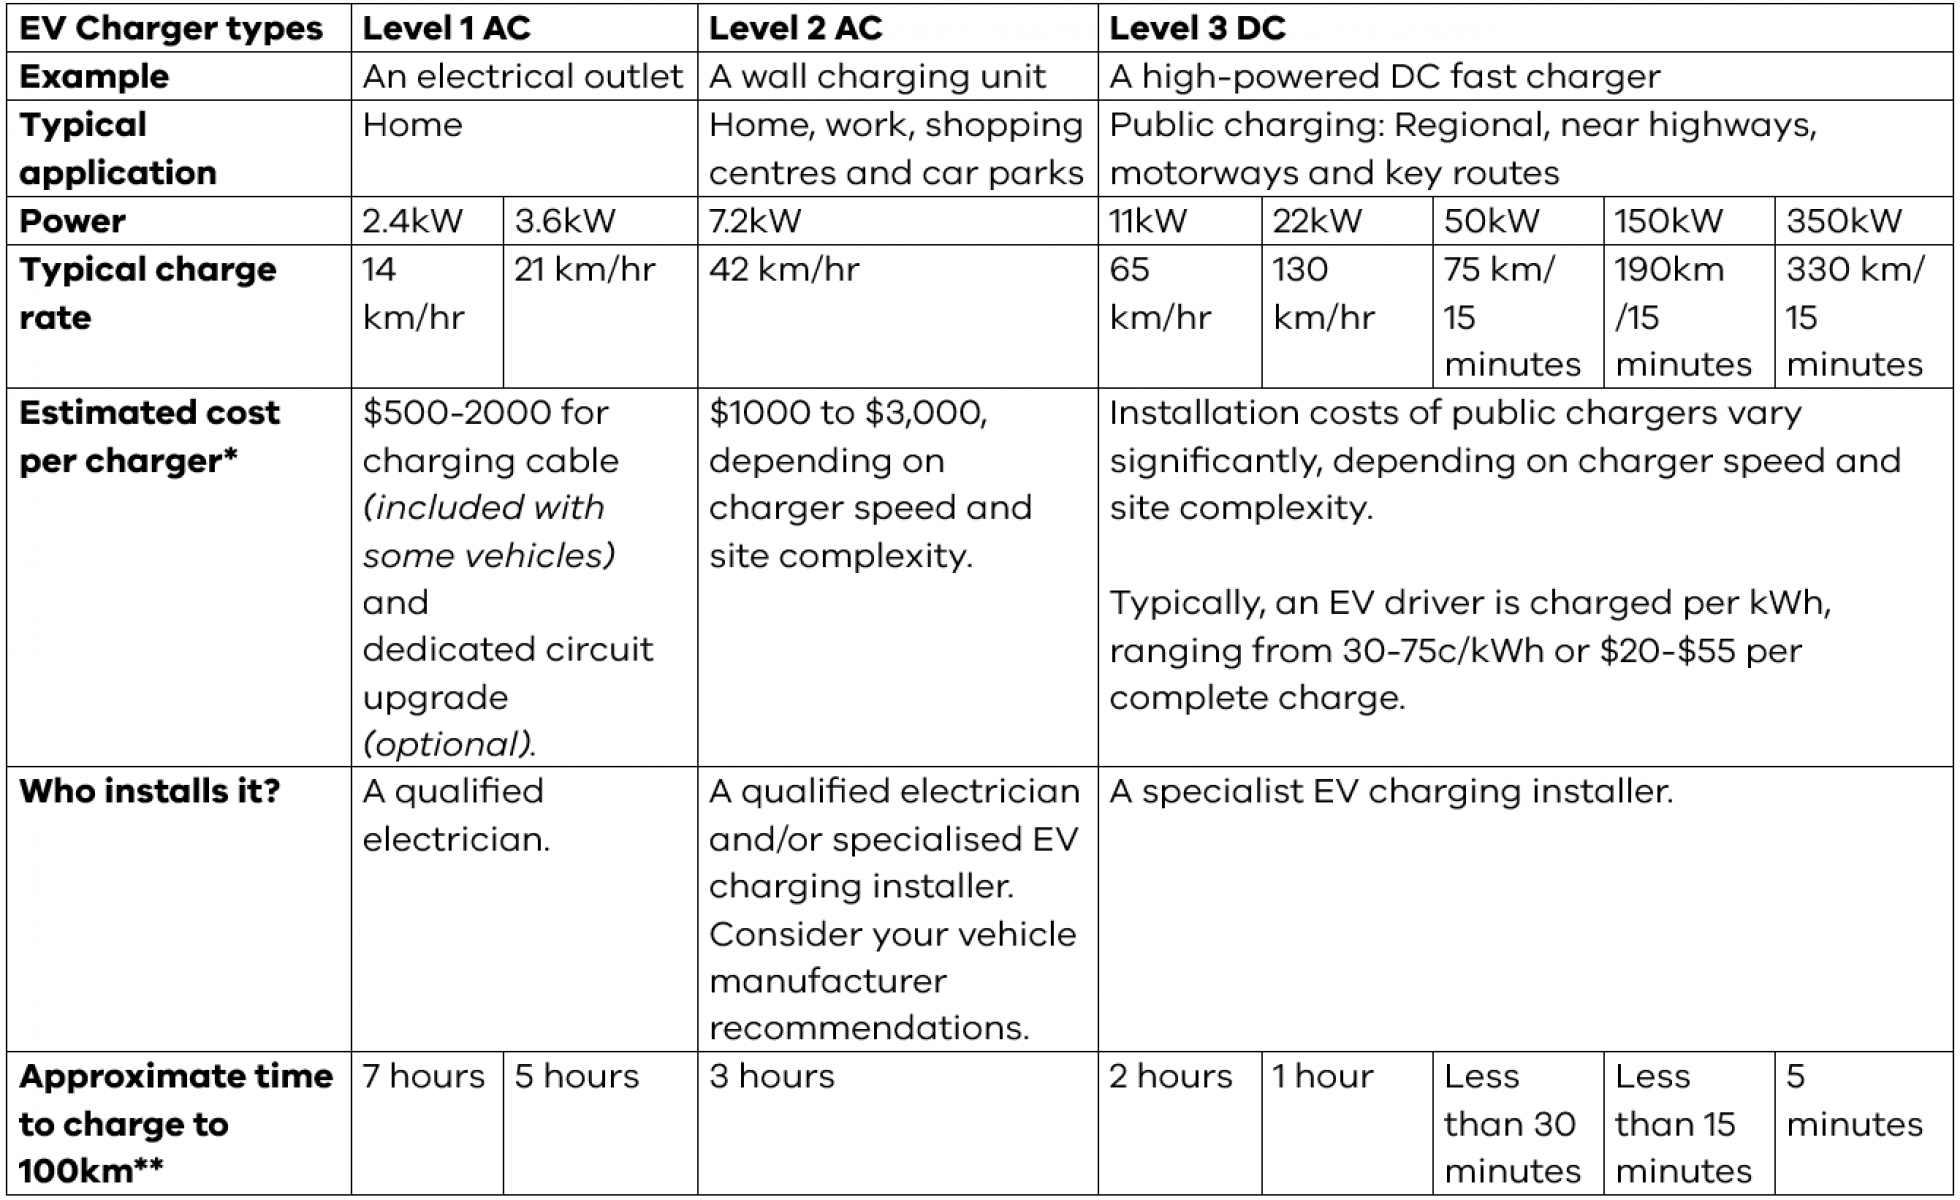 EV Charger Types  Level 1 AC:  Example: An electrical outlet Typical application: Home Power: 2.4kW Typical charge rate: 14 km/hr Estimated cost per charger: $500-2000 for charging cable (included with some vehicles) and dedicated circuit upgrade (optional). Who installs it?: A qualified electrician. Level 2 AC:  Example: A wall charging unit Typical application: Home, work, shopping centres and car parks Power: 3.6kW, 7.2kW, 11kW, 22kW Typical charge rate: 21 km/hr, 42 km/hr, 65 km/hr, 130 km/hr Estimated cost per charger: $1000 to $3,000, depending on charger speed and site complexity. Who installs it?: A qualified electrician and/or specialised EV charging installer. Consider your vehicle manufacturer recommendations. Level 3 DC:  Example: A high-powered DC fast-charger Typical application: Public charging: Regional, near highways, motorways and key routes Power: 50kW, 150kW, 350kW Typical charge rate: 75 km/15 minutes, 190 km/15 minutes, 330 km/15 minutes Estimated cost per charger: Installation costs of public chargers vary significantly, depending on charger speed and site complexity. Typically, an EV driver is charged per kWh, ranging from 30-75c/kWh or $20-$55 per complete charge. Who installs it?: A specialist EV charging installer